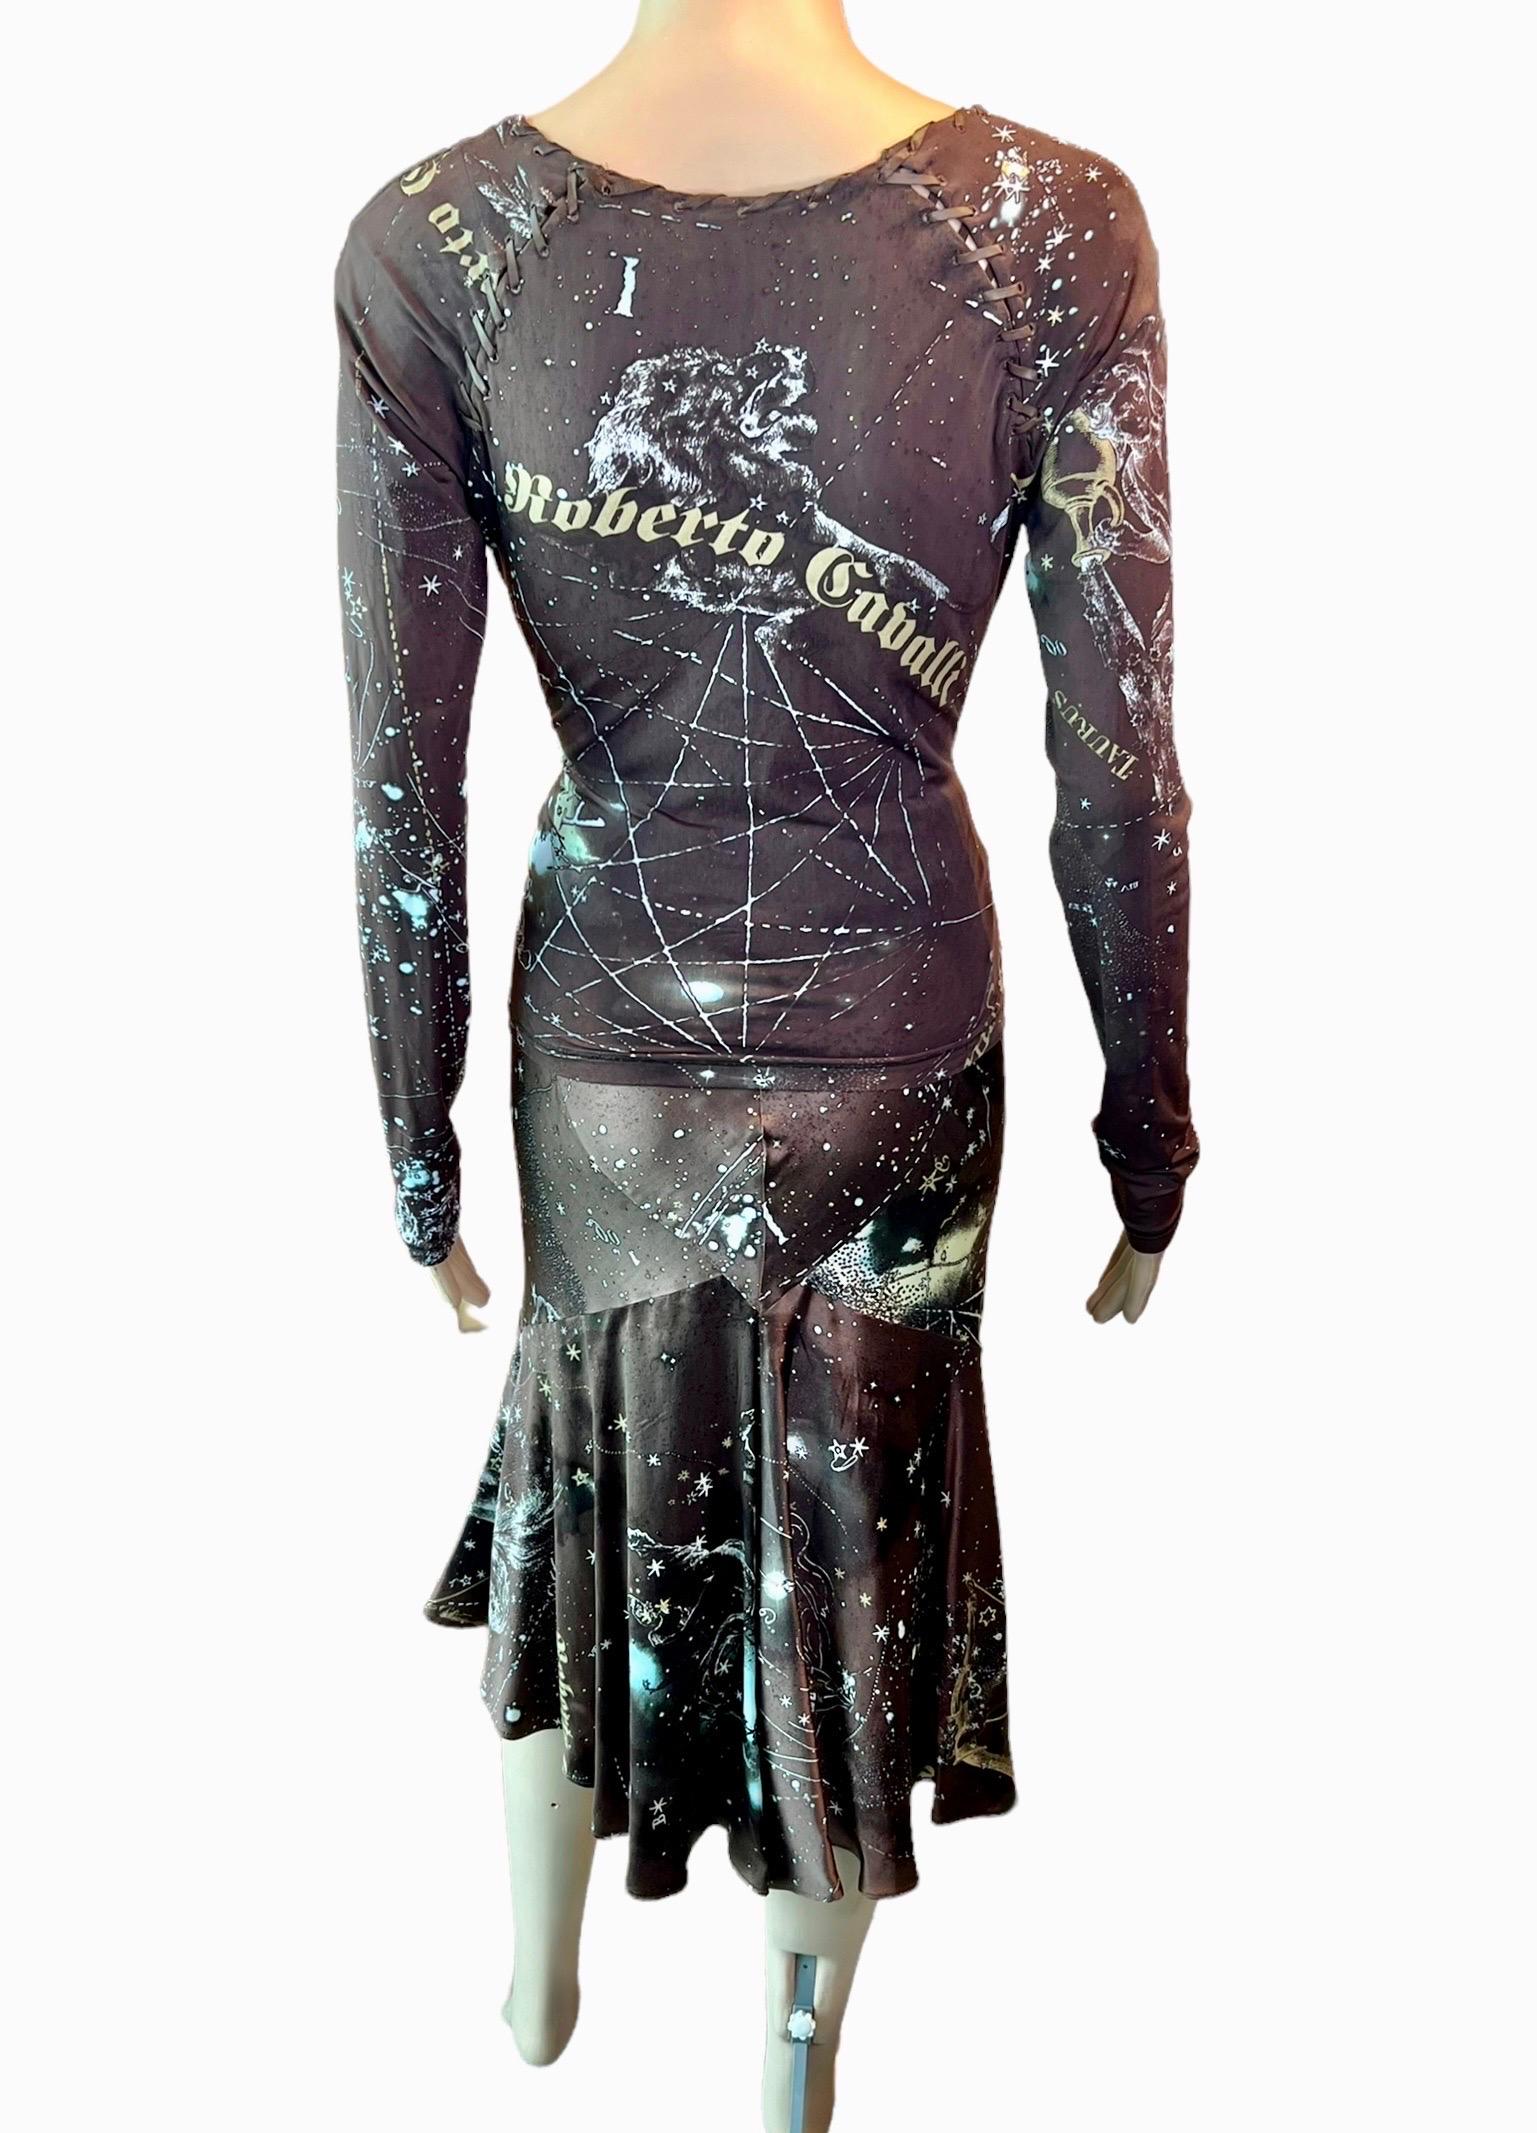 Roberto Cavalli F/W 2003 Constellation Astrology Print Skirt and Top 2 Piece Set For Sale 3